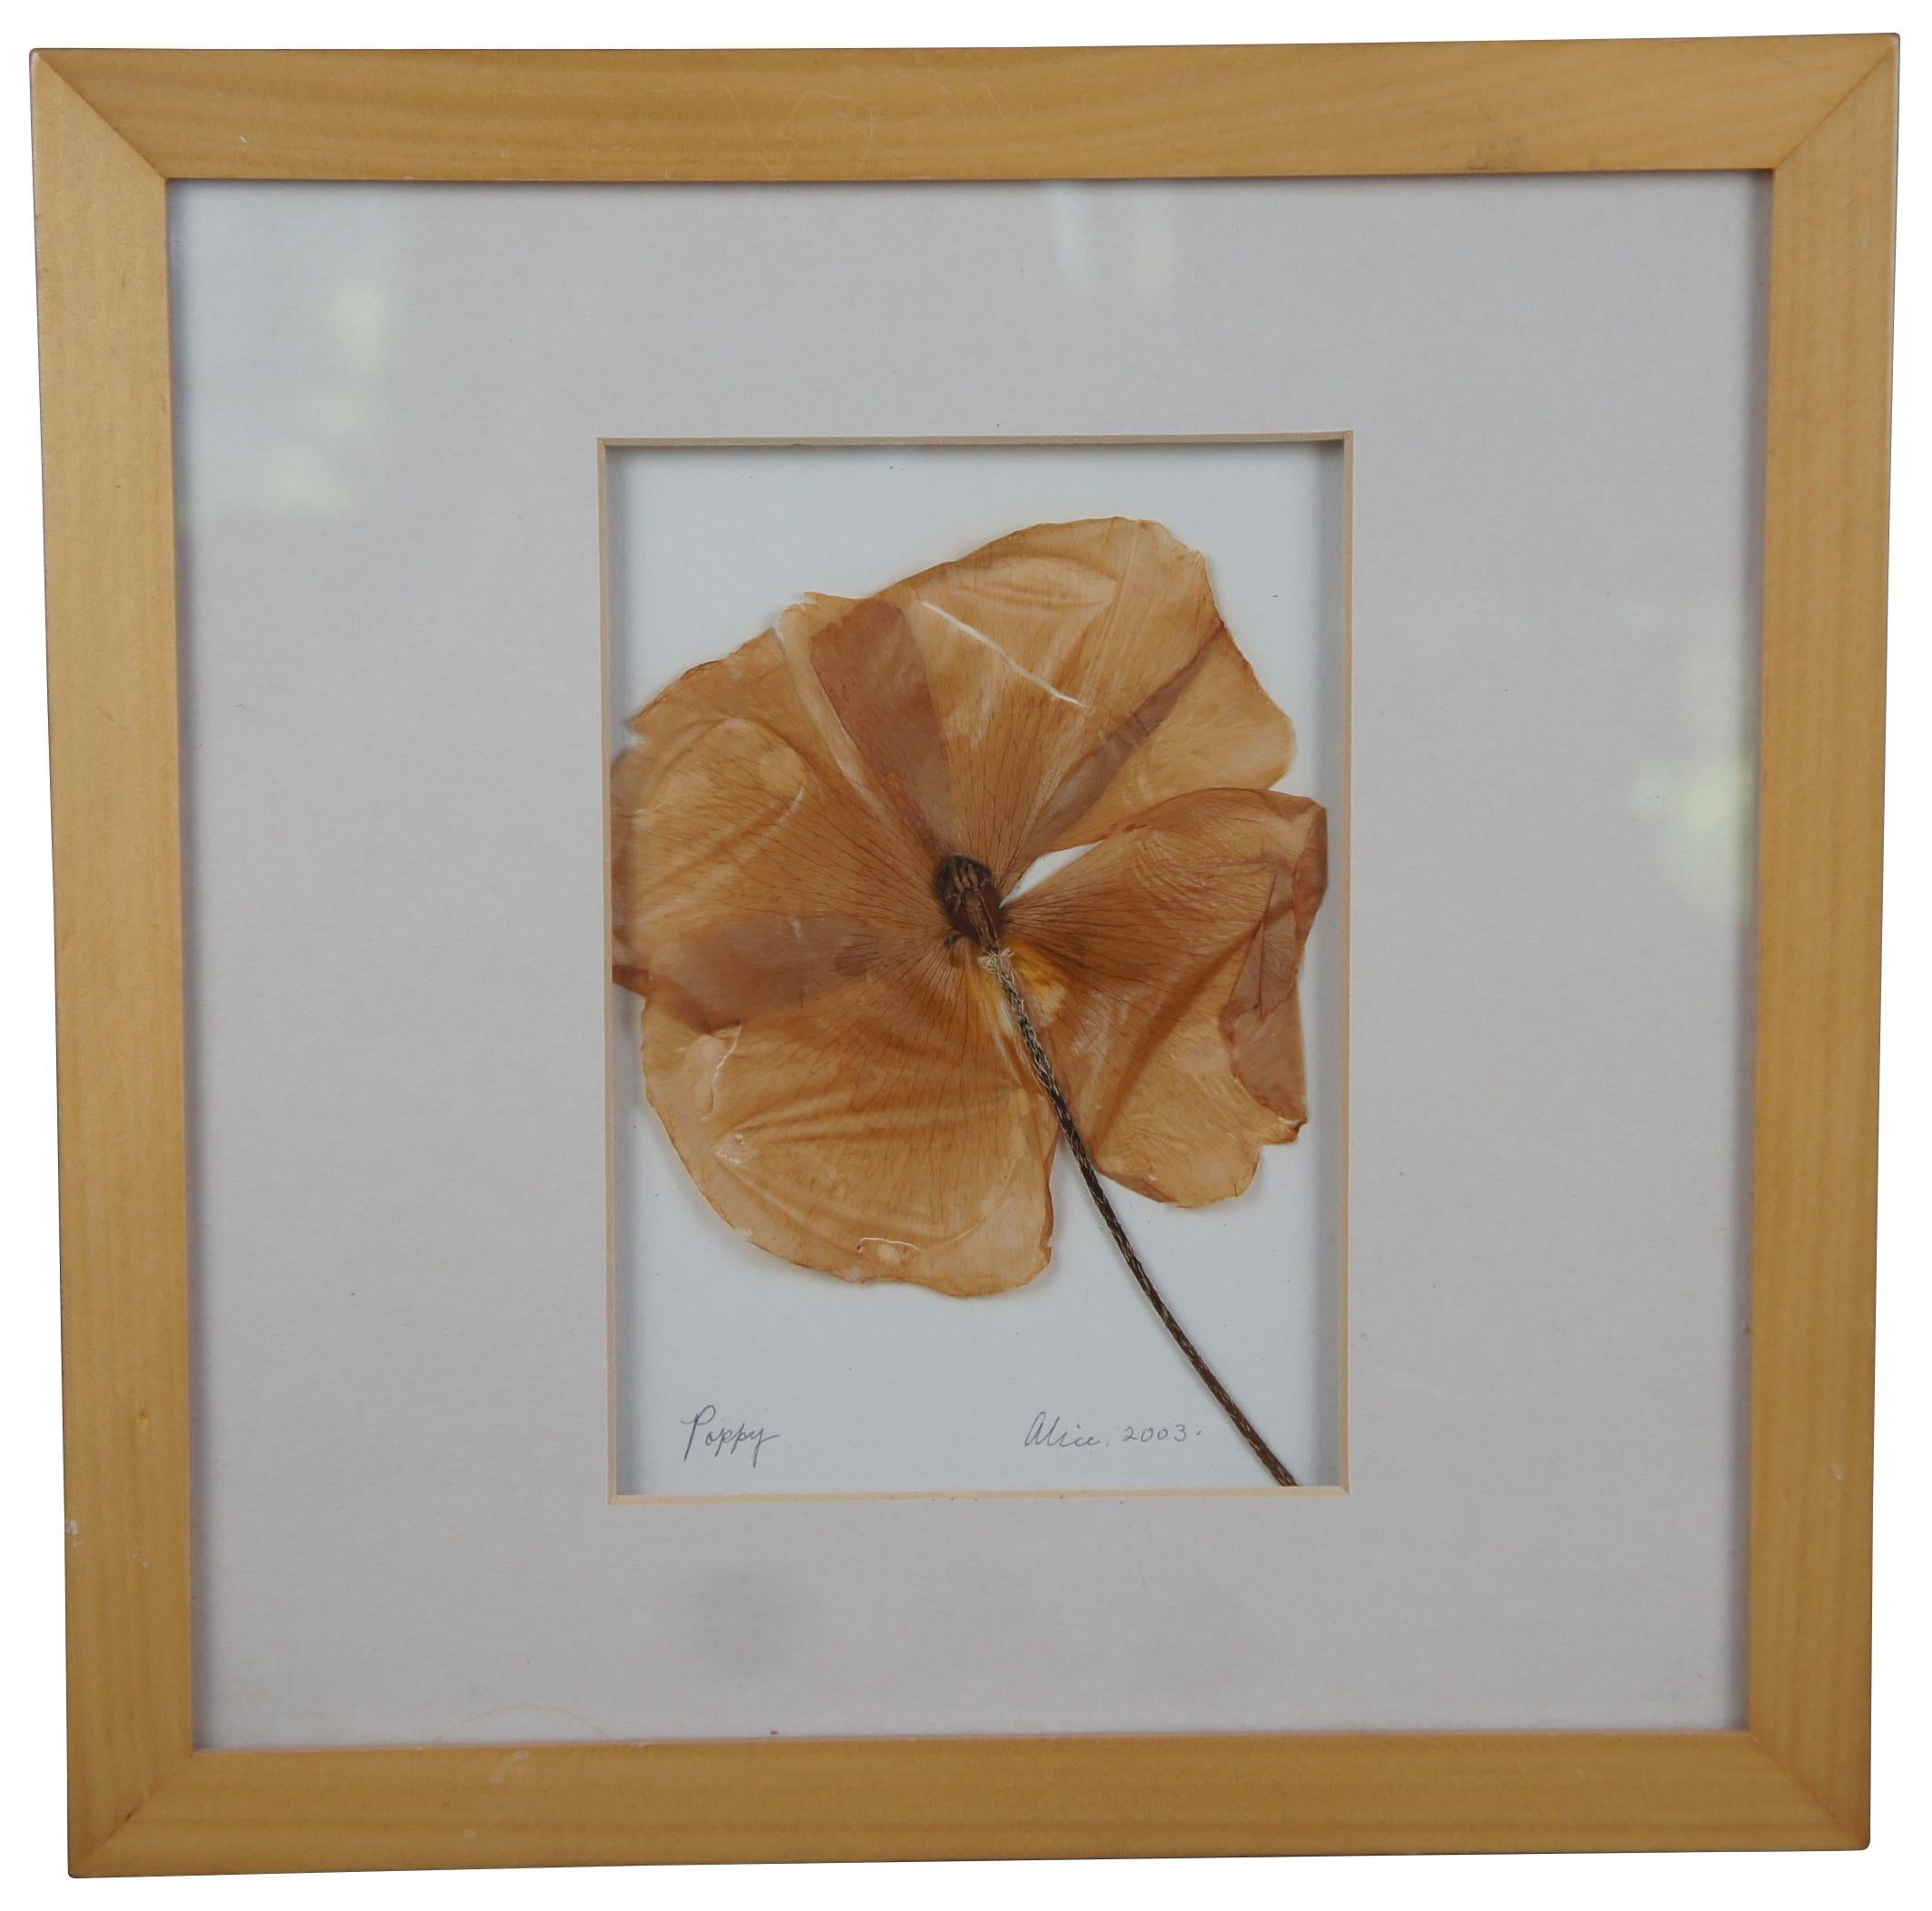 Pair of dried and pressed flowers in matching light wood frames, signed by Alice with ‘Impressions by Alice’ stickers on the back. One a poppy flower, the other hydrangea. Size: 11